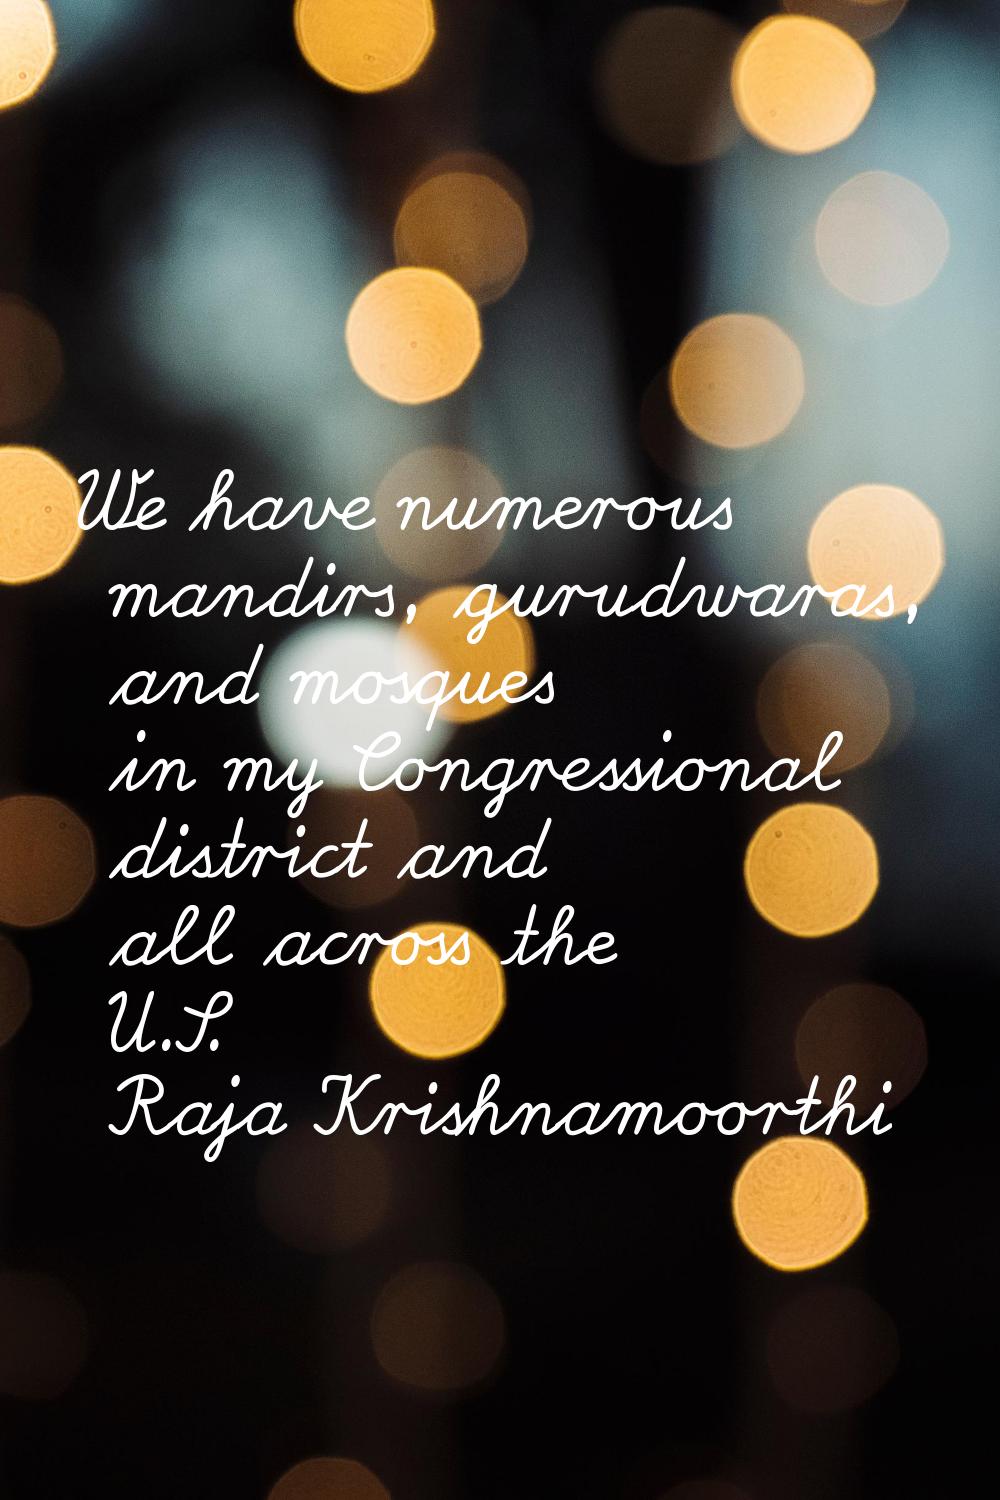 We have numerous mandirs, gurudwaras, and mosques in my Congressional district and all across the U